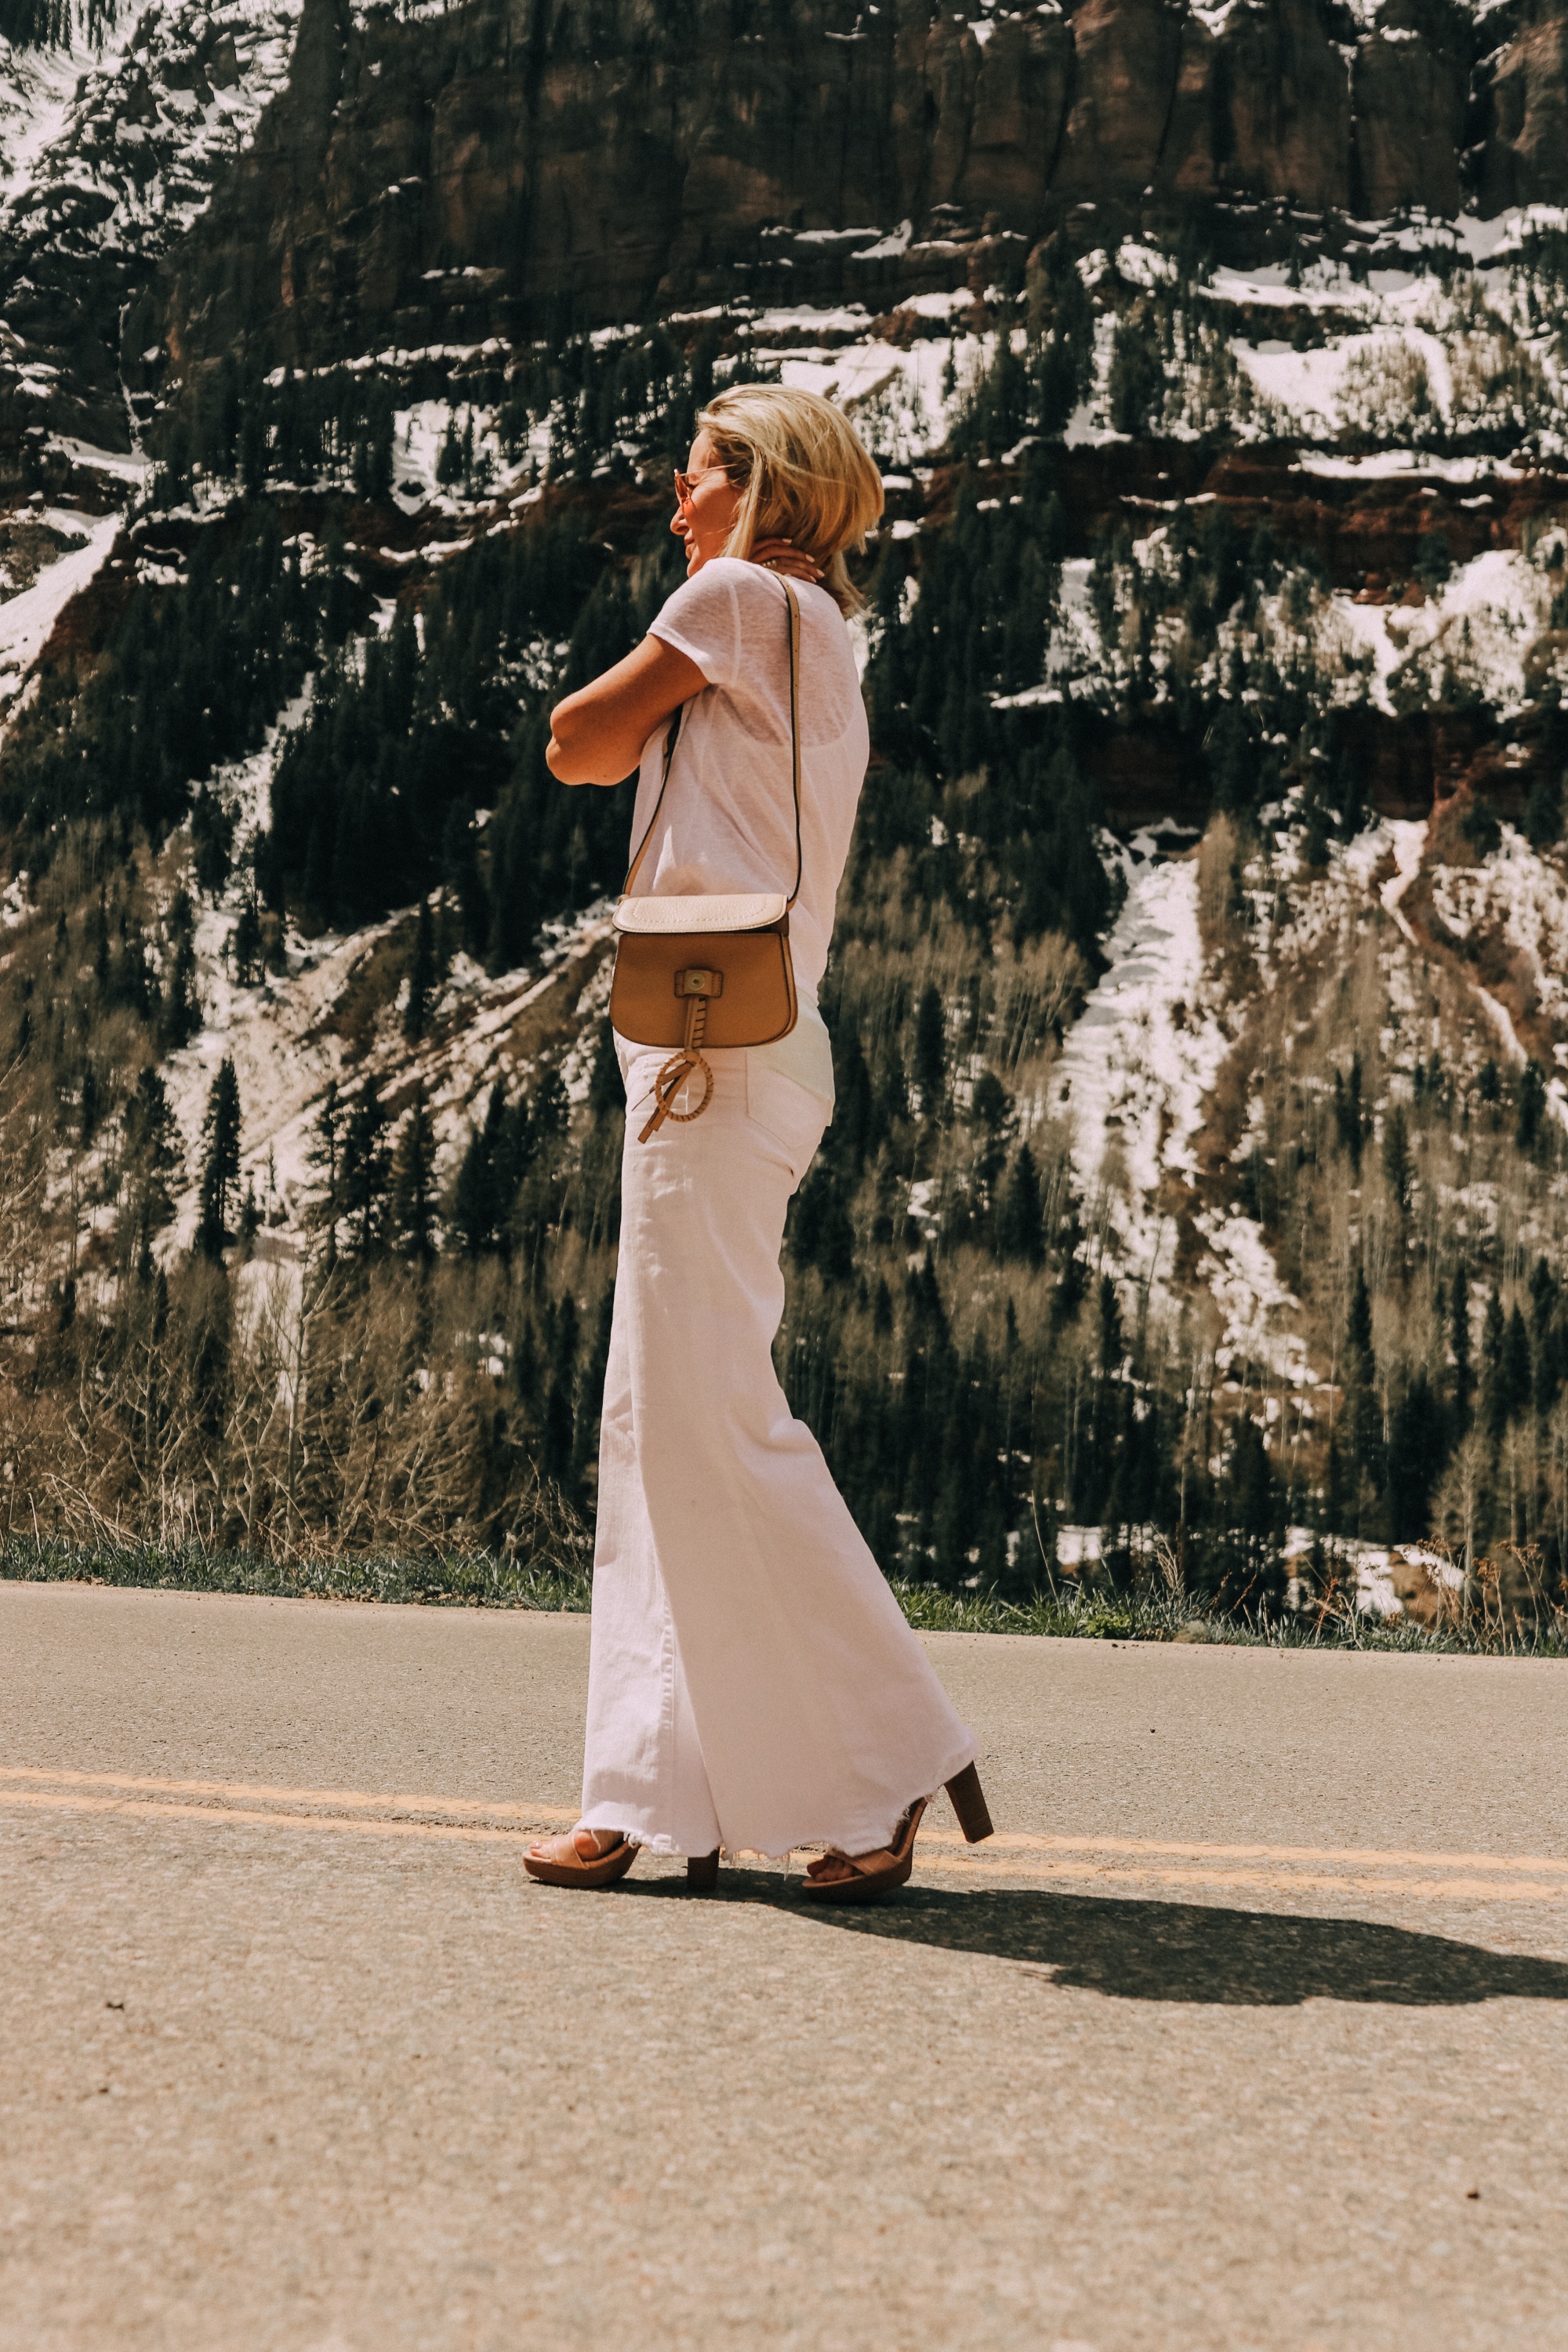 Neutral Accessories, Fashion blogger Erin Busbee of BusbeeStyle.com featuring a beige shoulder bag, neutral platform sandals, and a lariat necklace by Vince Camuto in Telluride, CO